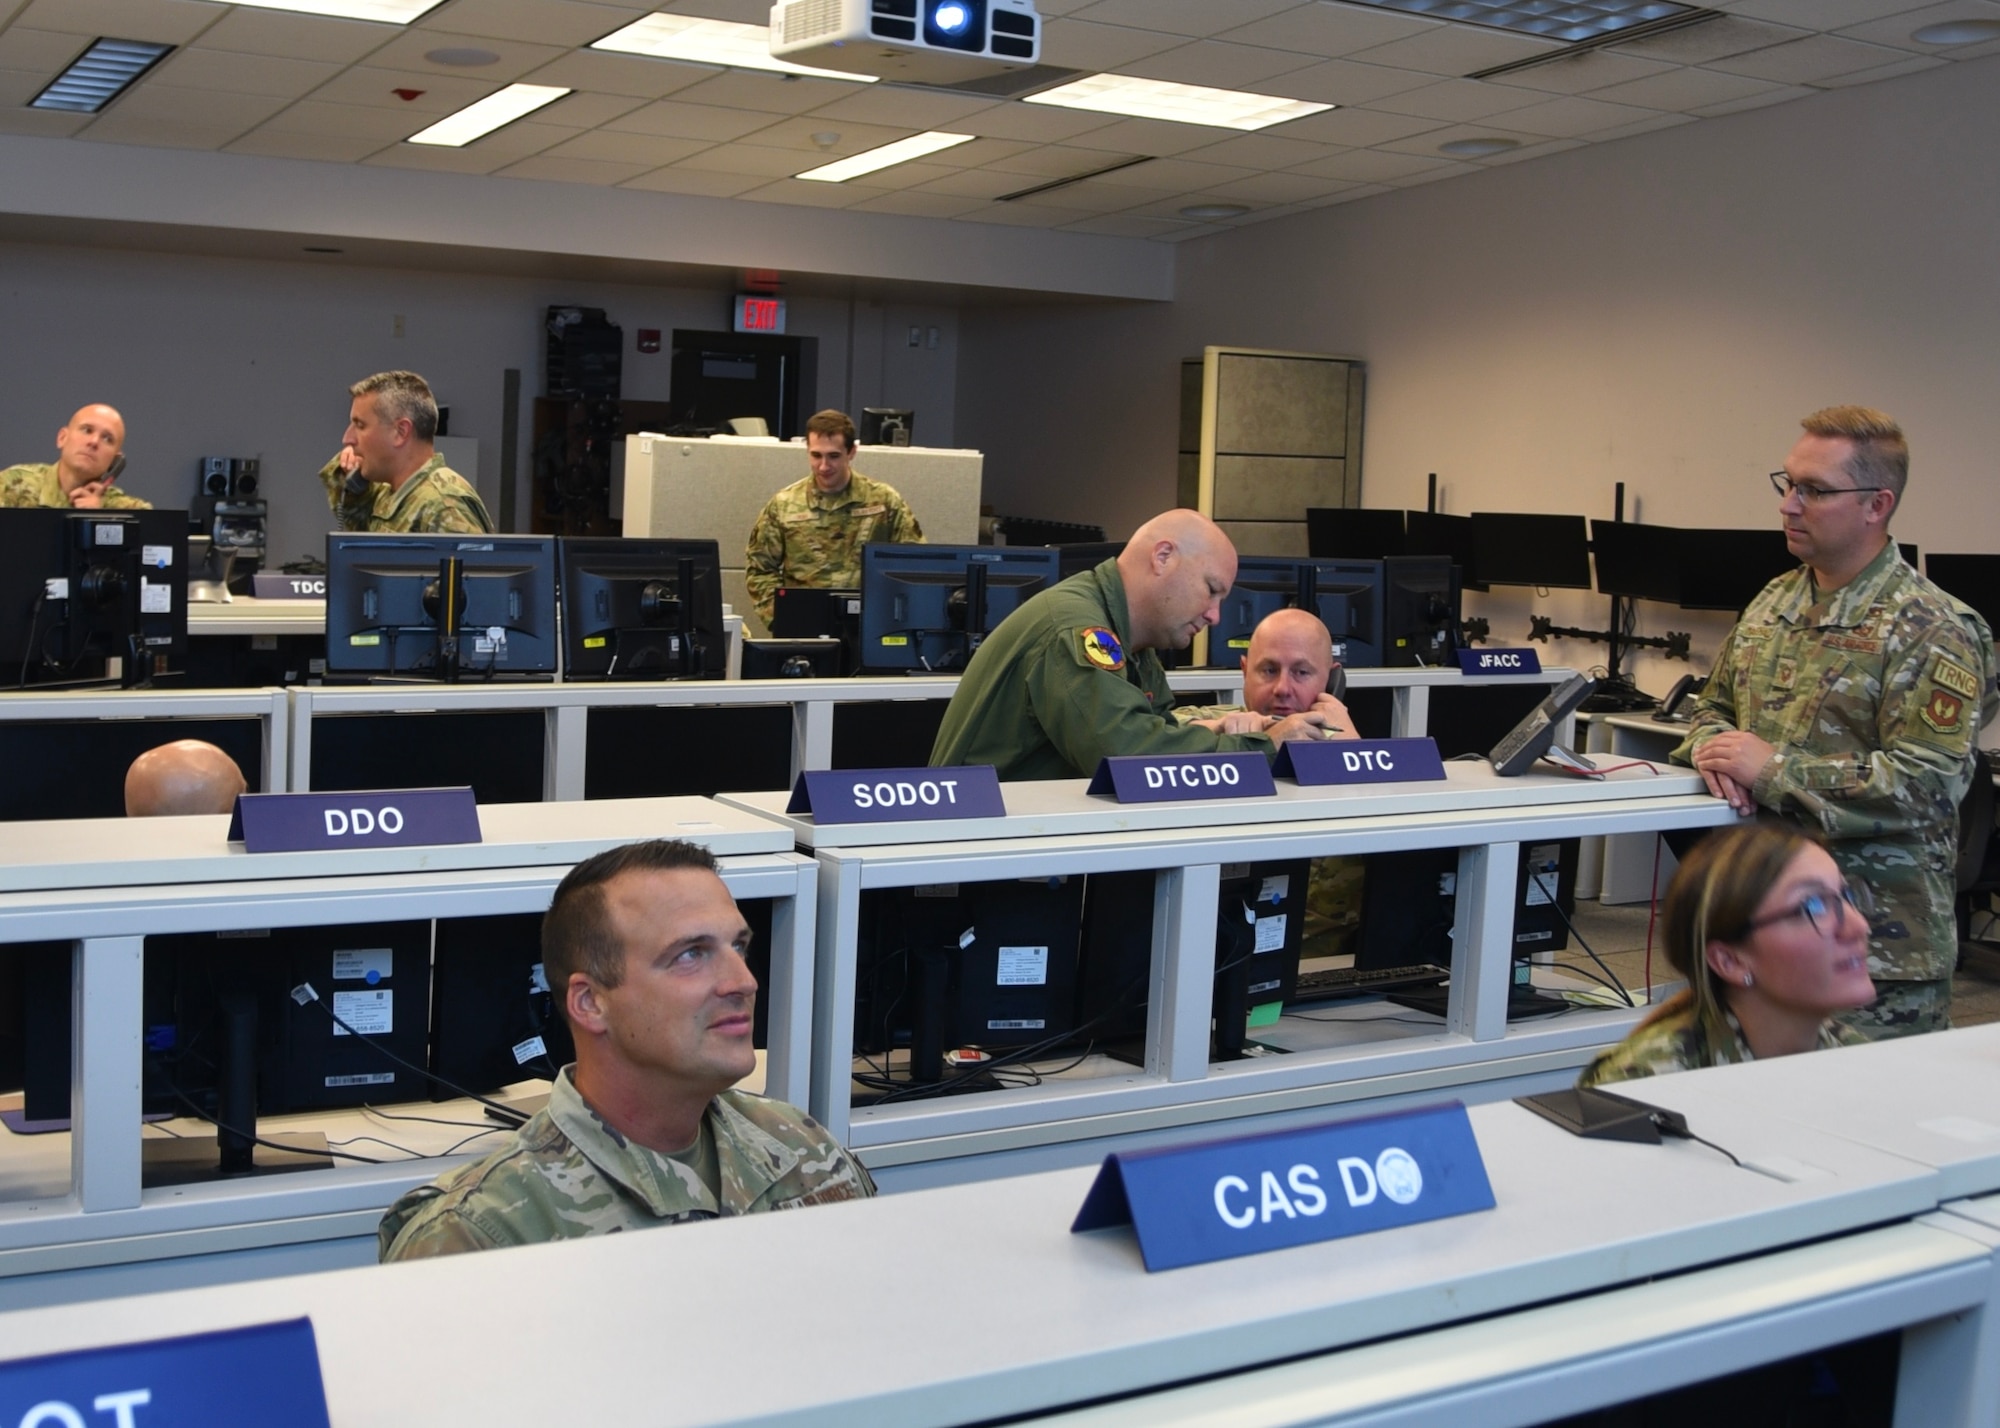 Airmen of the New York Air National Guard’s 152nd Air Operations Group run weapons system checks and review the command and control air tasking cycle at Hancock Air National Guard Base, NY.